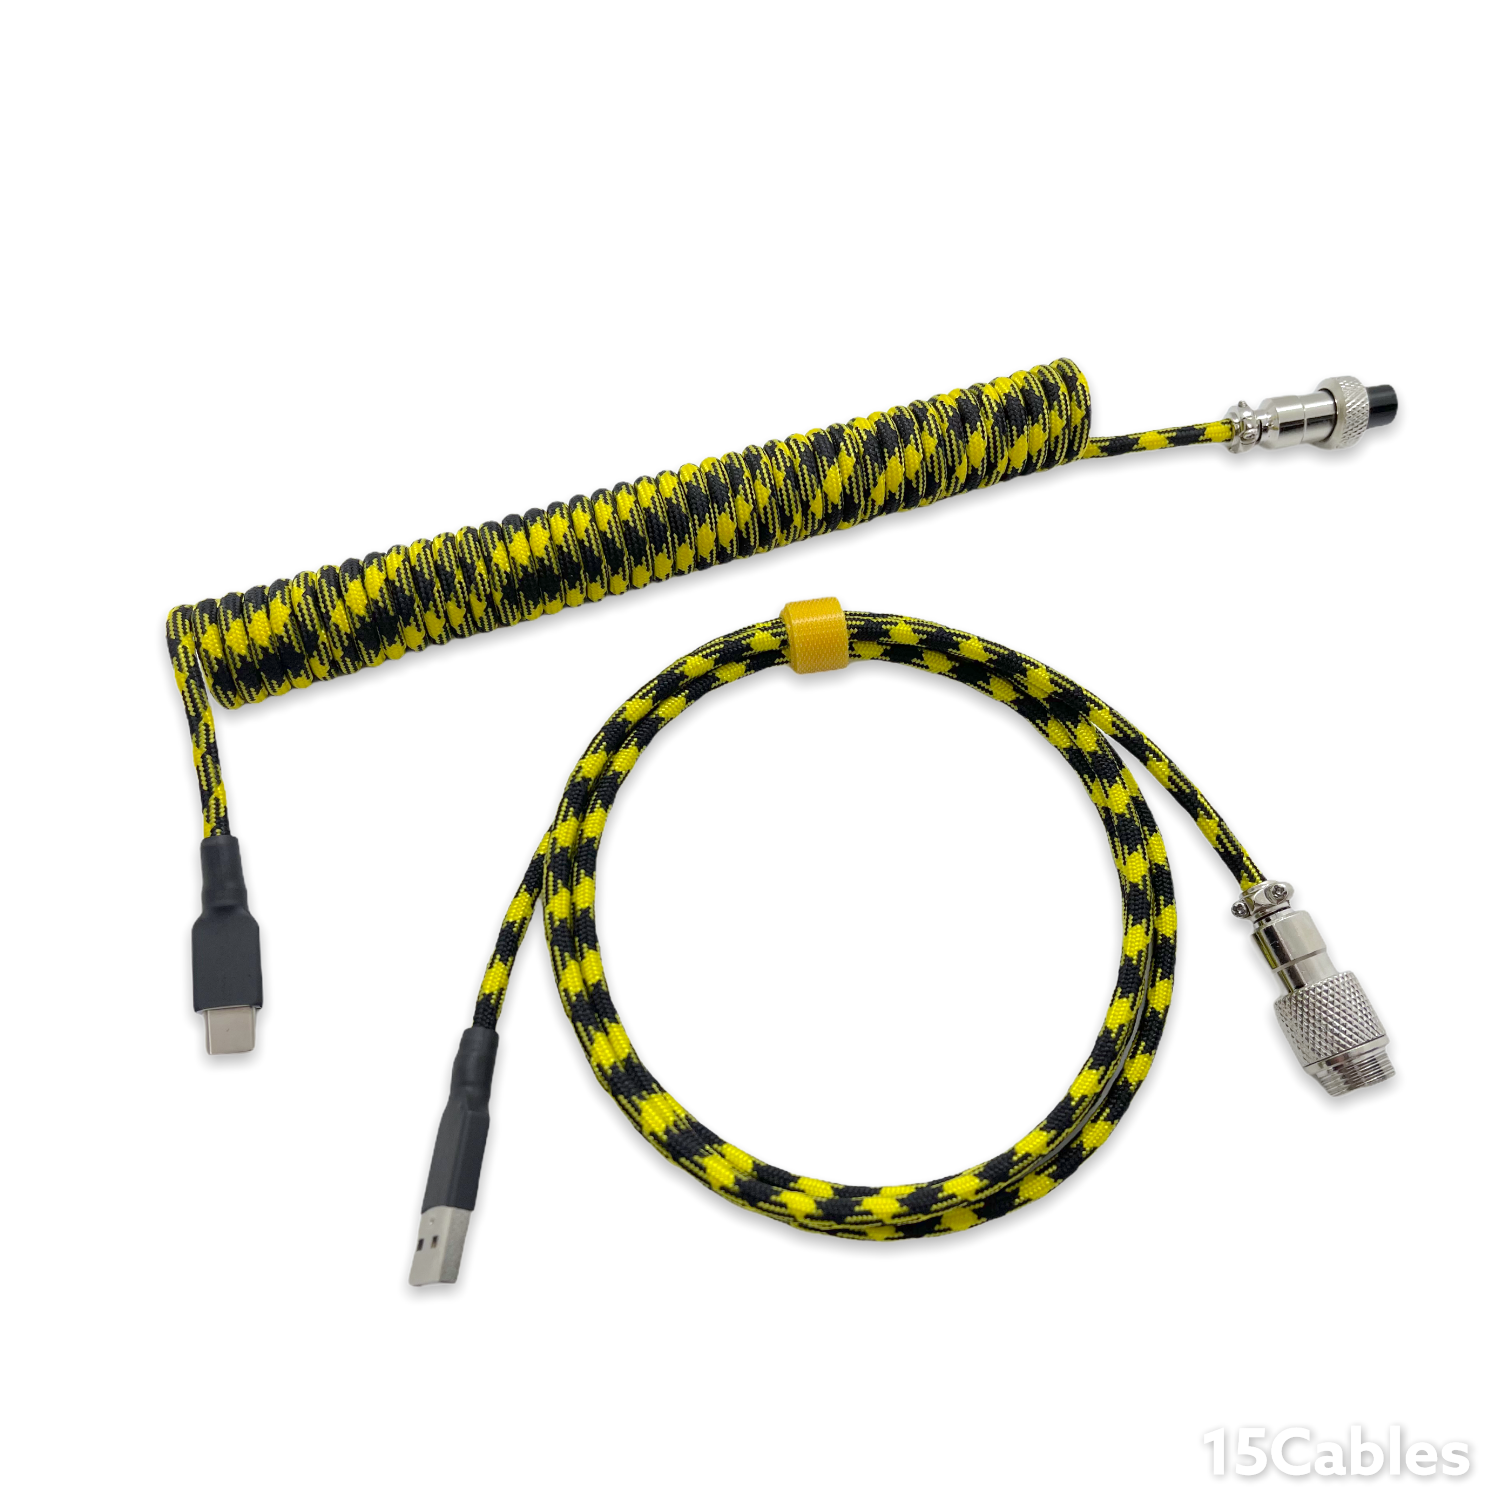 Starter Coiled Cables